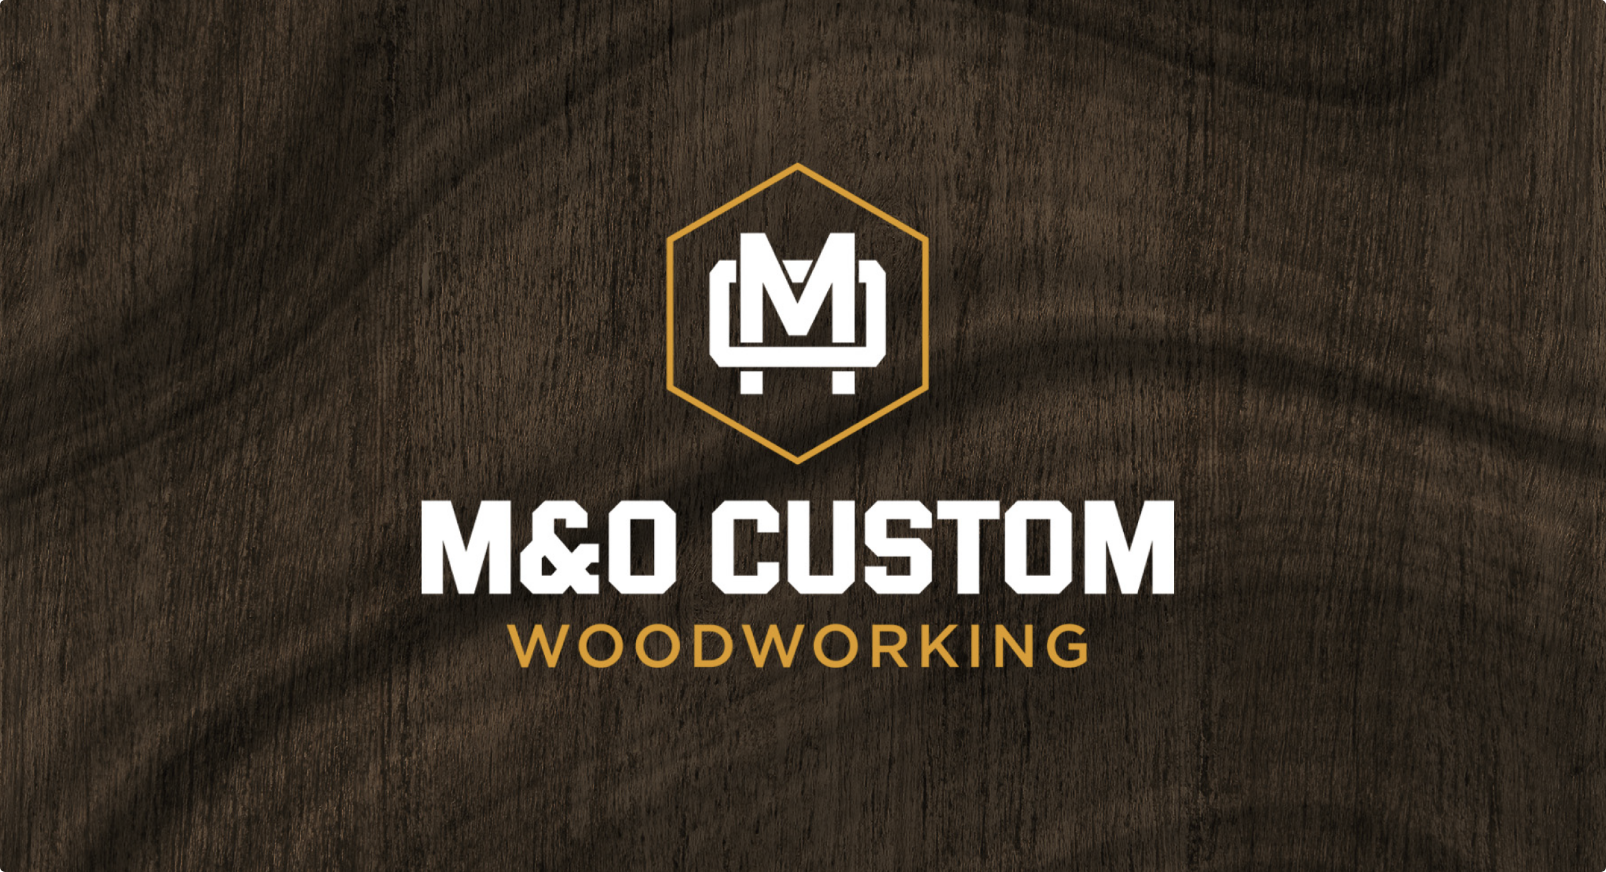 M&O Custom Woodworking branding, logo and typography for a carpentry business